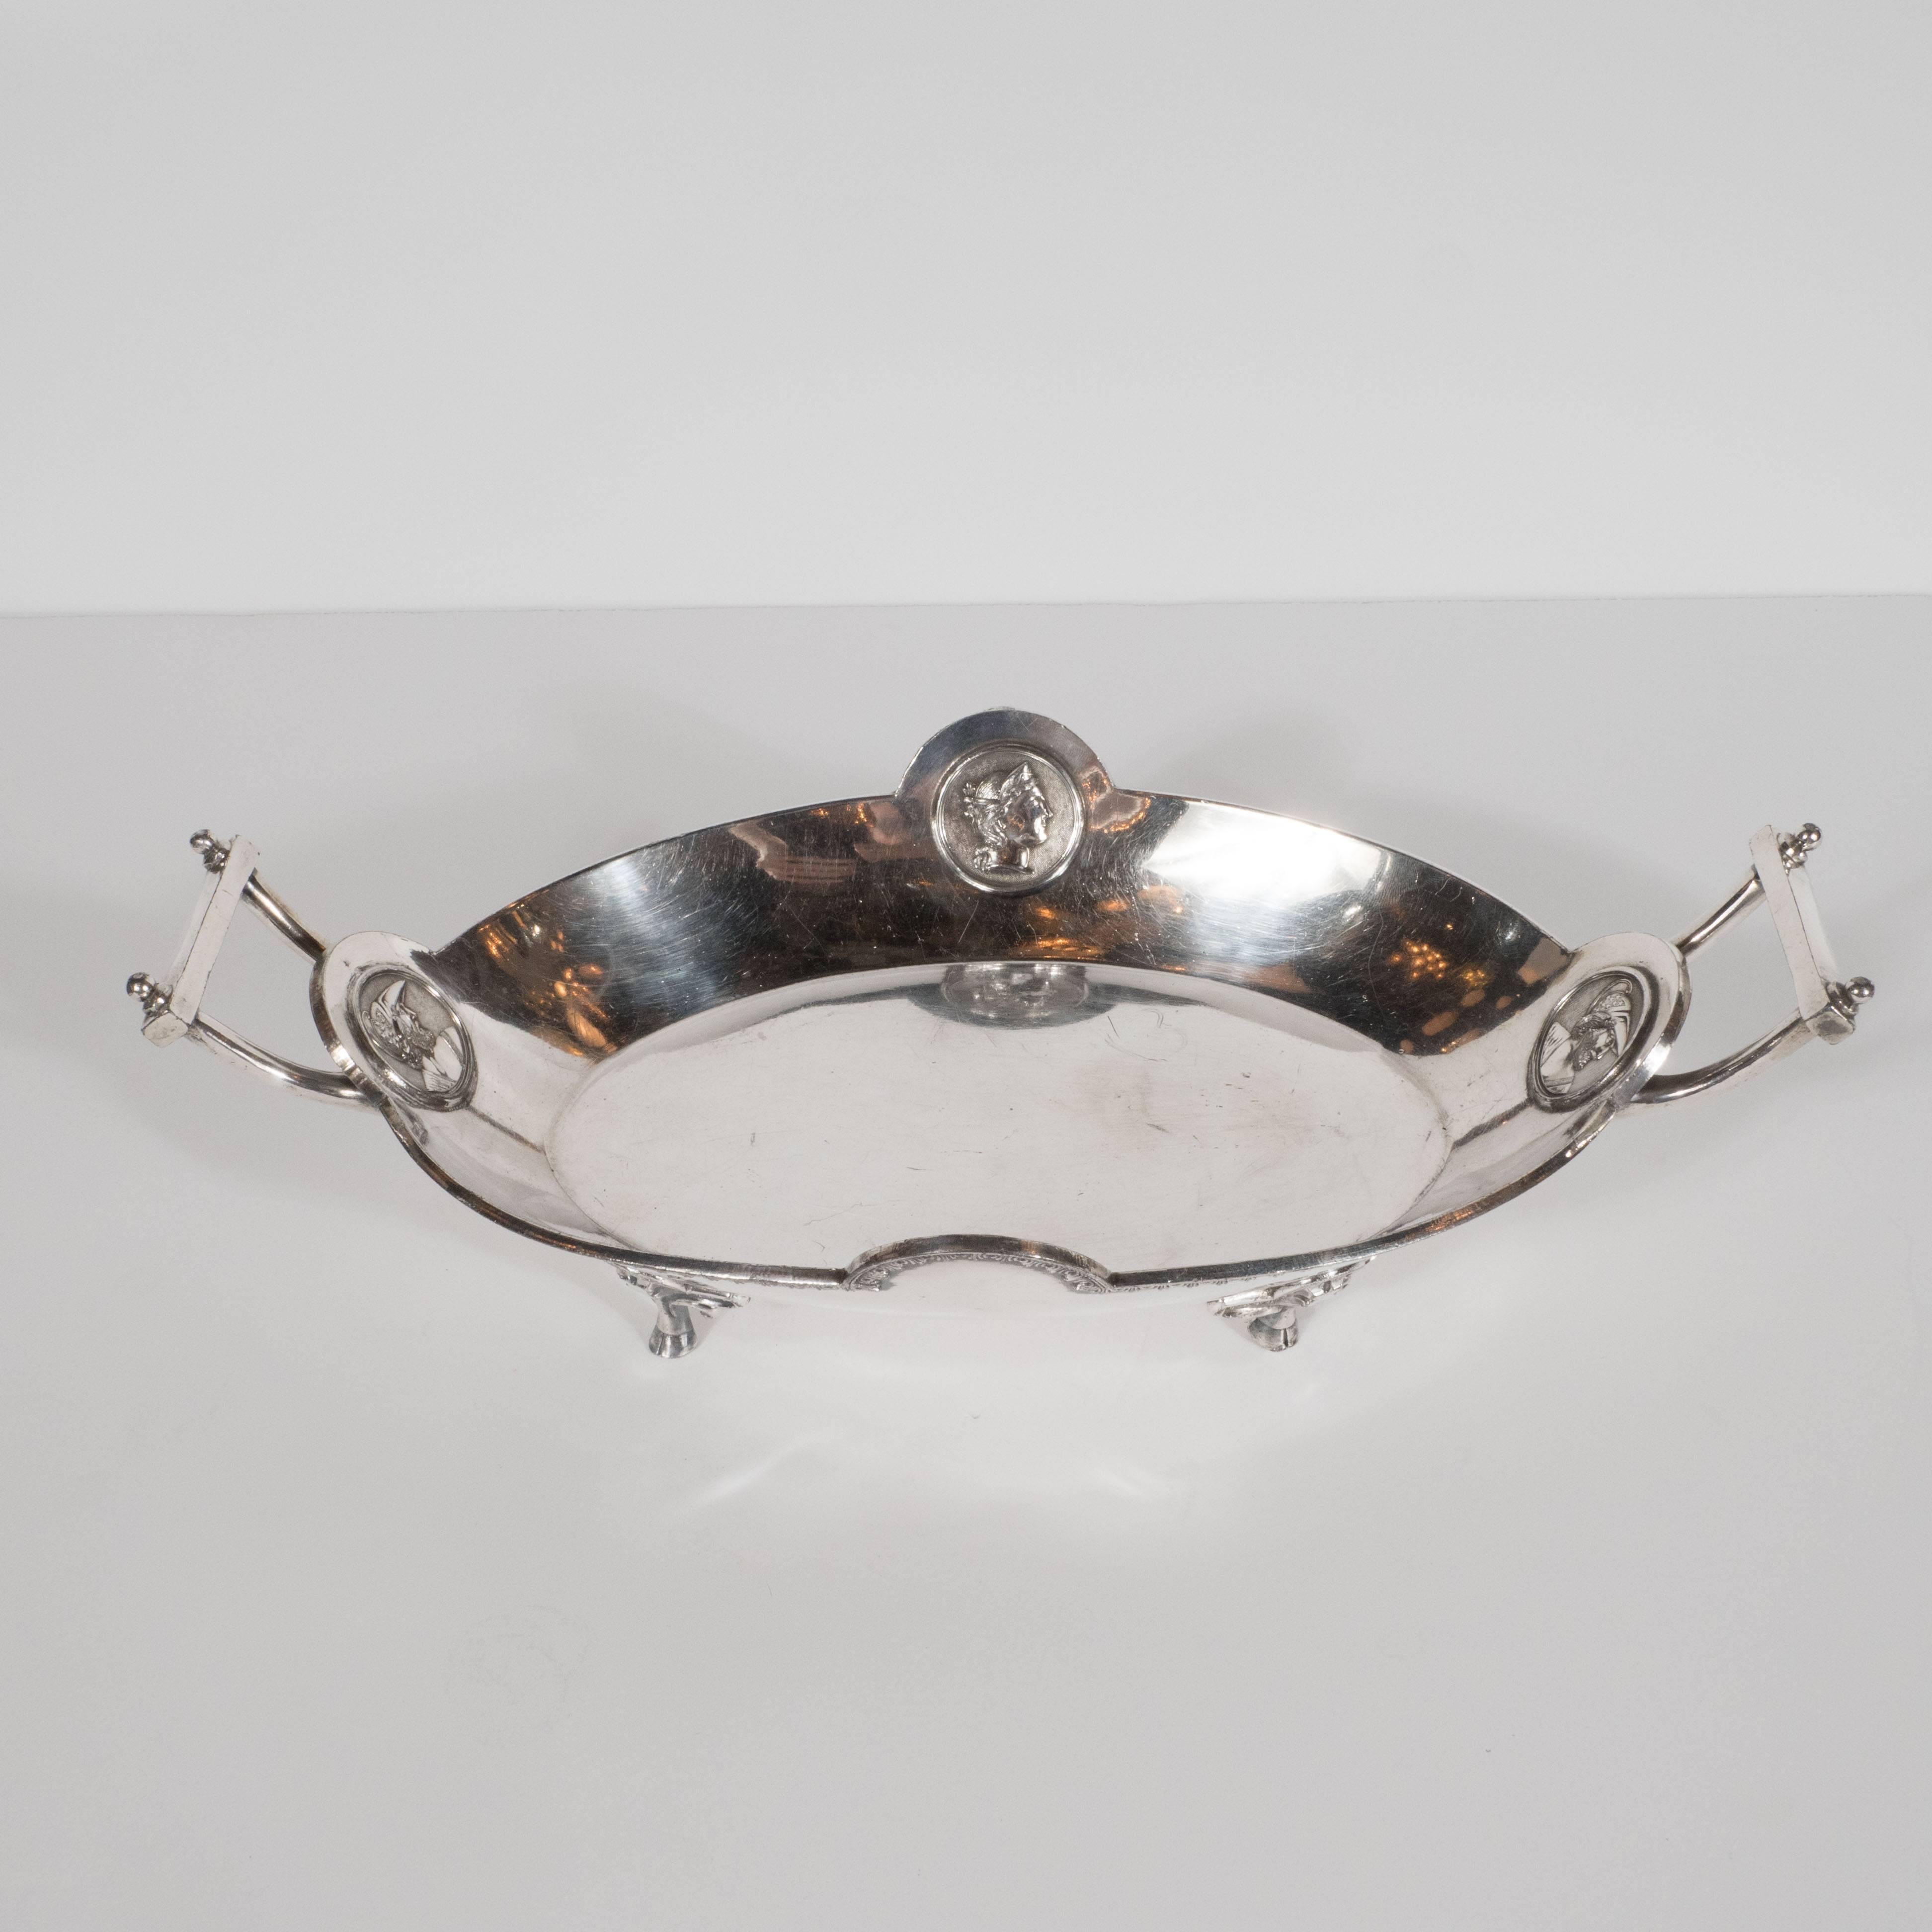 This refined antique handled bowl was produced by Redfield & Rice- an esteemed producer of silver wares based in New York State. The bowl has a flat ovoid centre and steeply sloped sides. The two curved handles are connected via a flat rectangular